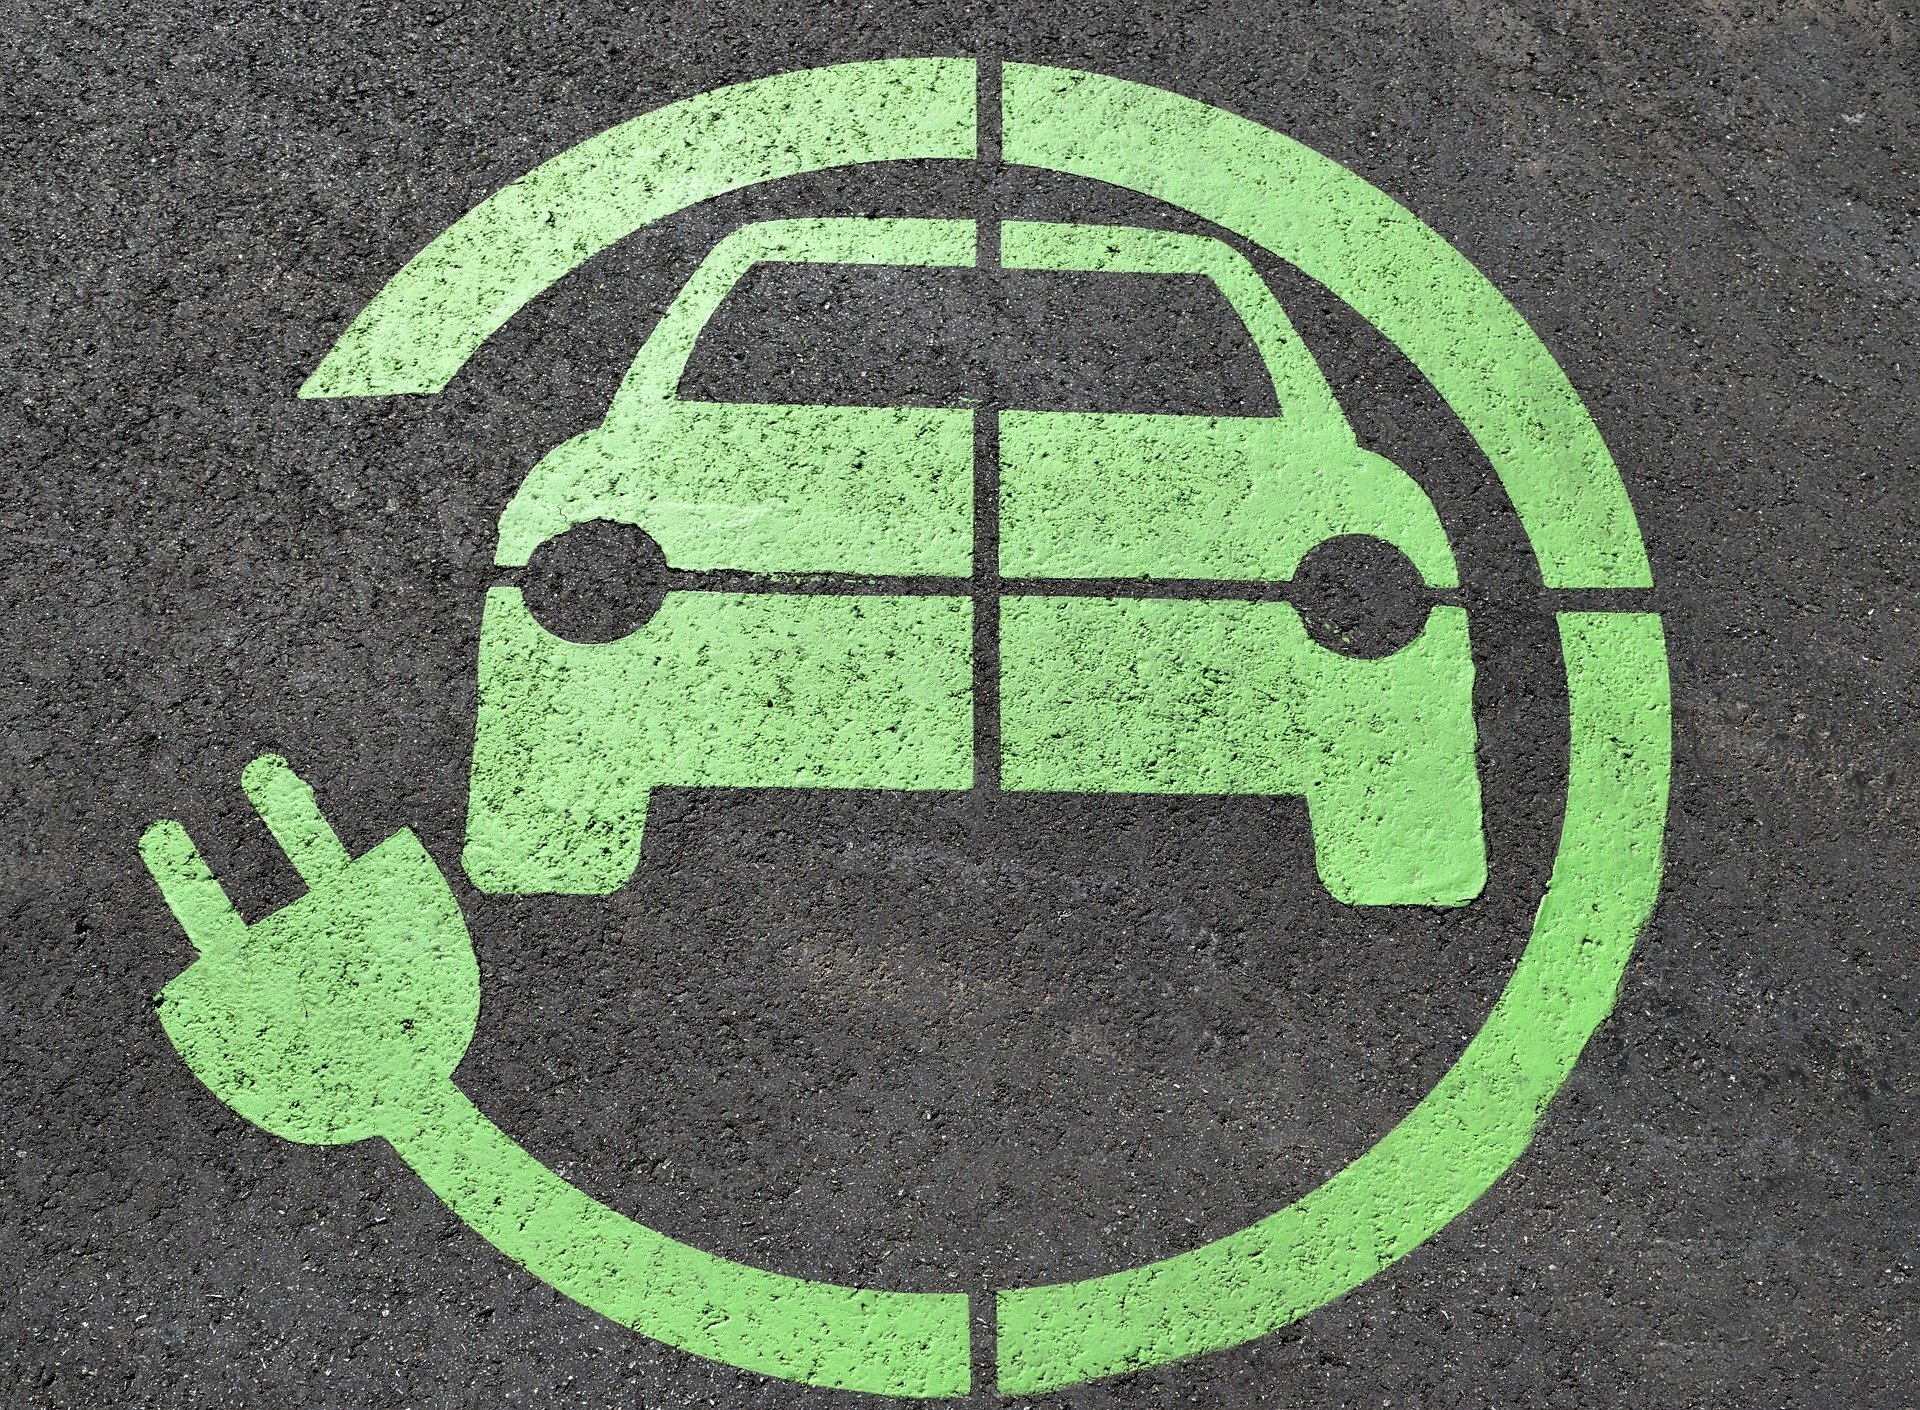 Sustainable Mobility: The Benefits and Challenges of Electric Cars